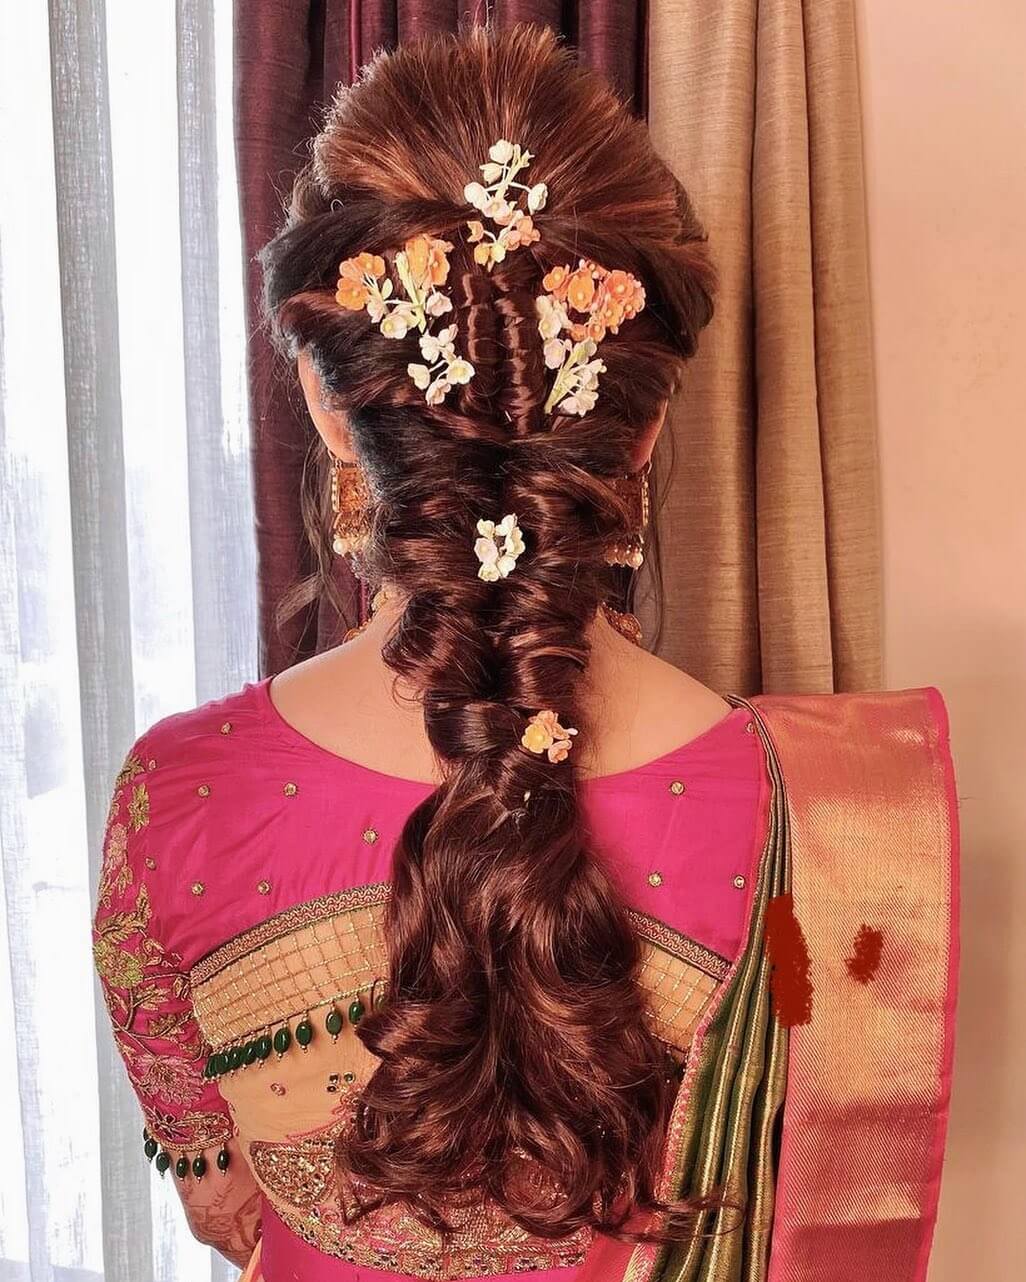 French braided hairstyle for Maharashtrian bride